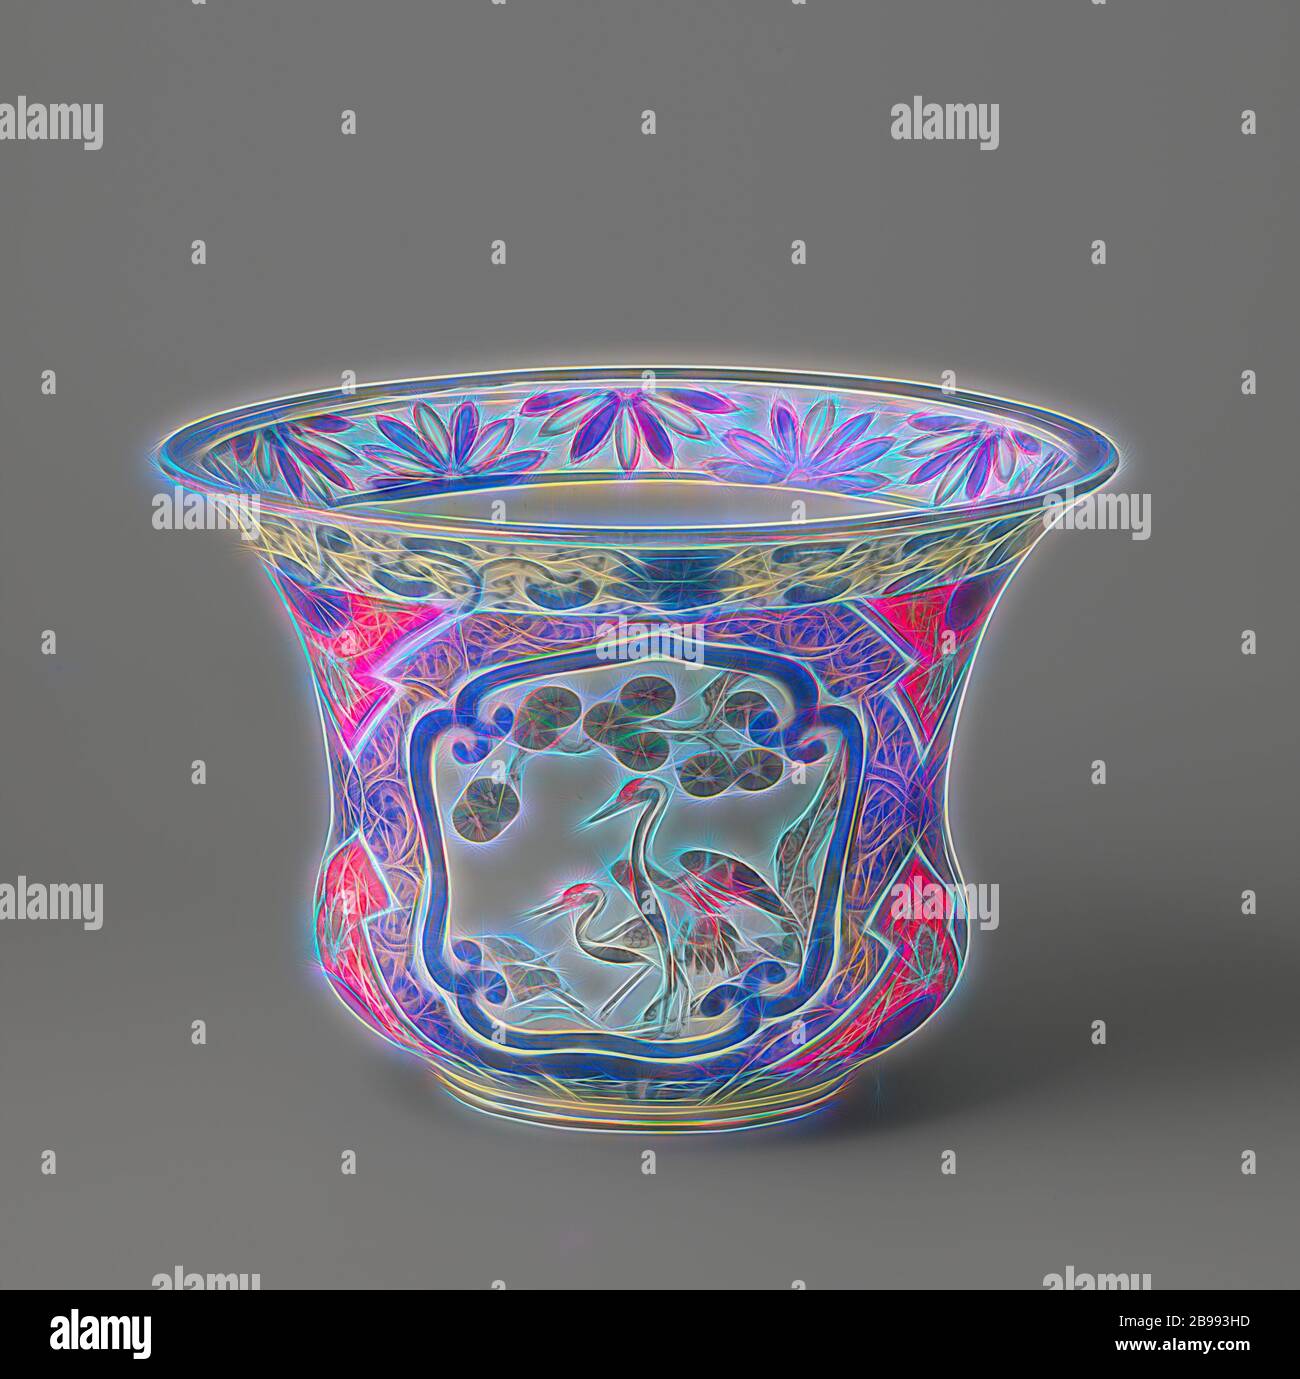 https://c8.alamy.com/comp/2B993HD/flowerpot-with-cranes-shishi-hoo-bird-and-lotur-scrolls-flowerpot-from-porcelain-painted-in-underglaze-blue-and-on-the-glaze-red-green-black-and-gold-on-the-outside-wall-three-scalloped-cartouches-with-two-cranes-with-a-pine-tree-a-hoo-bird-above-a-tree-and-one-with-a-shishi-lion-dog-with-a-peony-around-the-cartouches-leaf-vines-interrupted-by-two-opposite-sections-from-the-edge-and-the-foot-with-lotus-vines-and-a-half-flower-rosette-around-the-foot-a-band-with-petal-shaped-boxes-with-a-flower-branch-a-band-with-lotus-vines-on-the-outer-edge-the-inner-edge-with-a-band-with-half-f-2B993HD.jpg